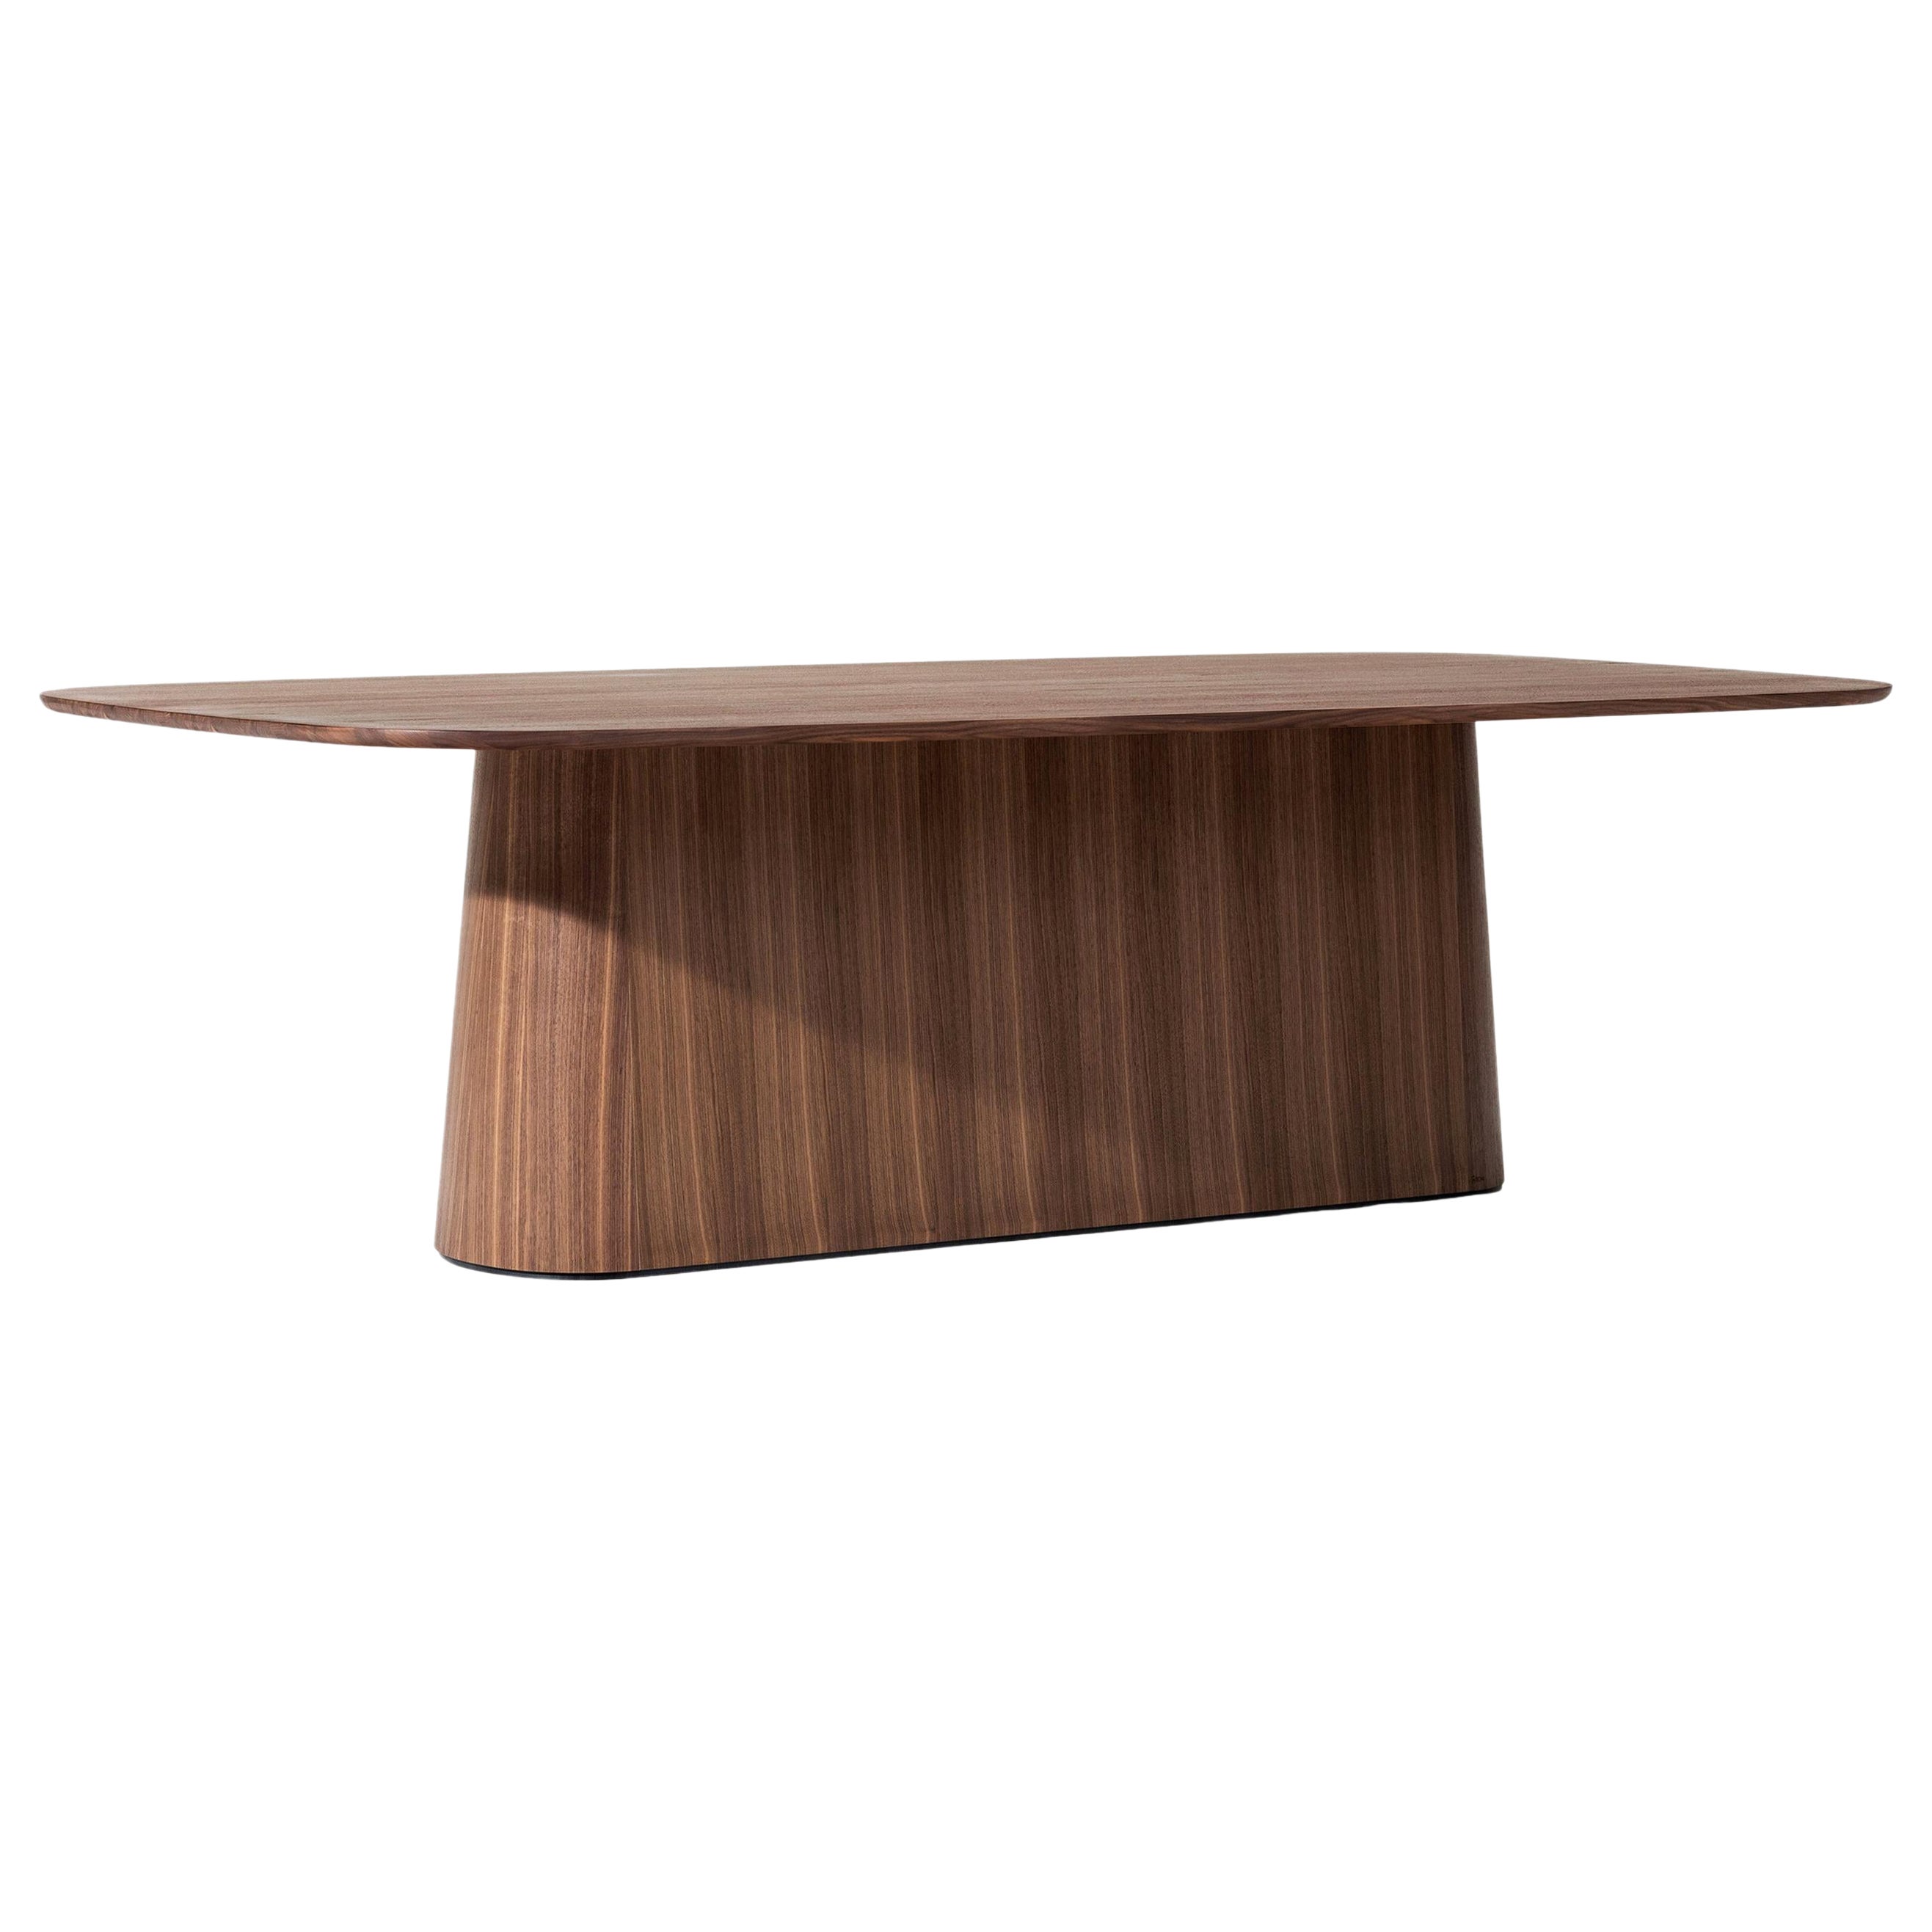 Contemporary Dining Table POV 467, Solid Oak or Walnut, 280